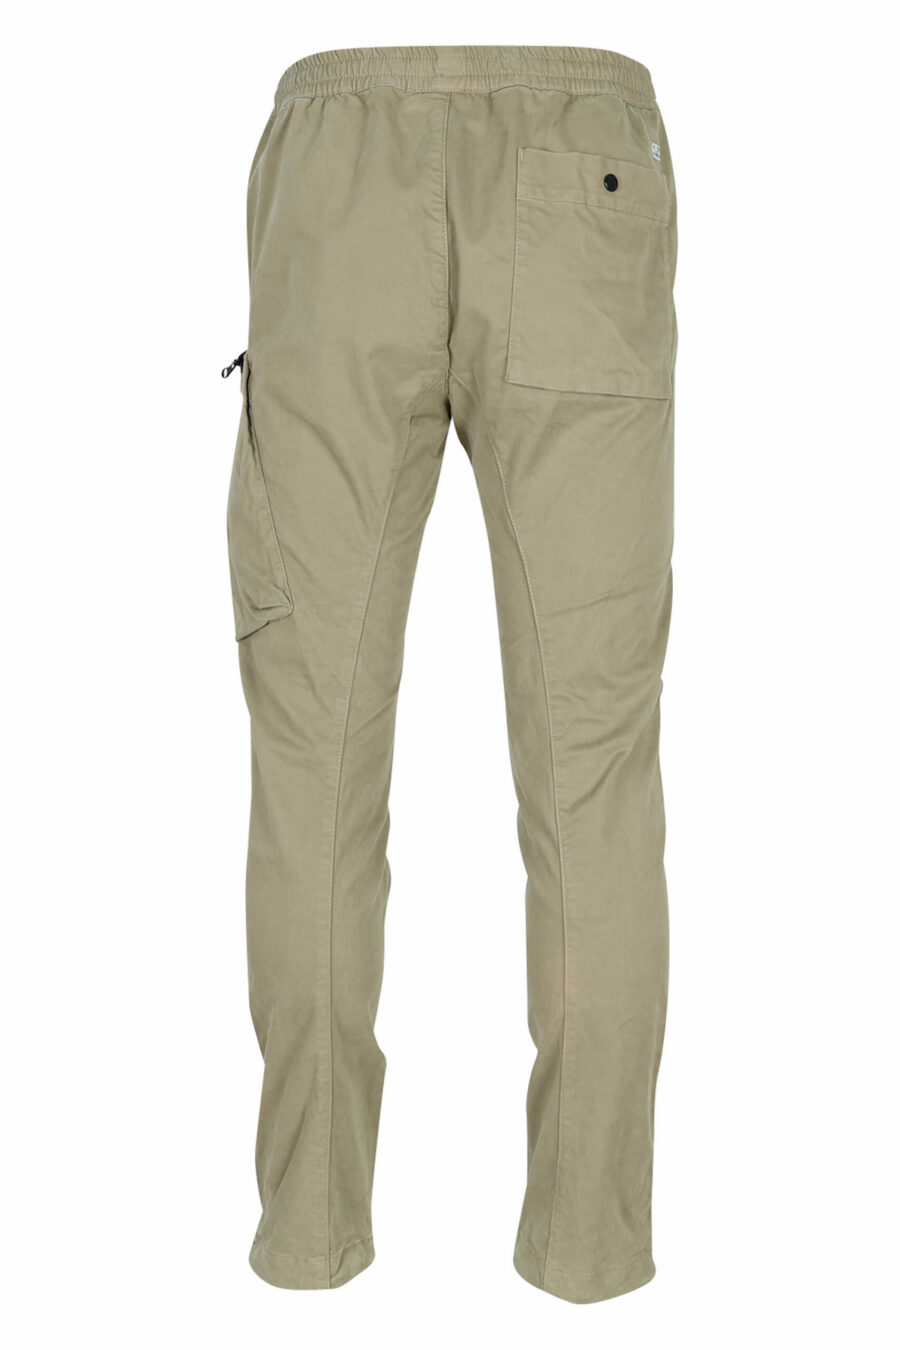 C.P. Company - Beige corduroy trousers with side pocket and lens logo - BLS  Fashion